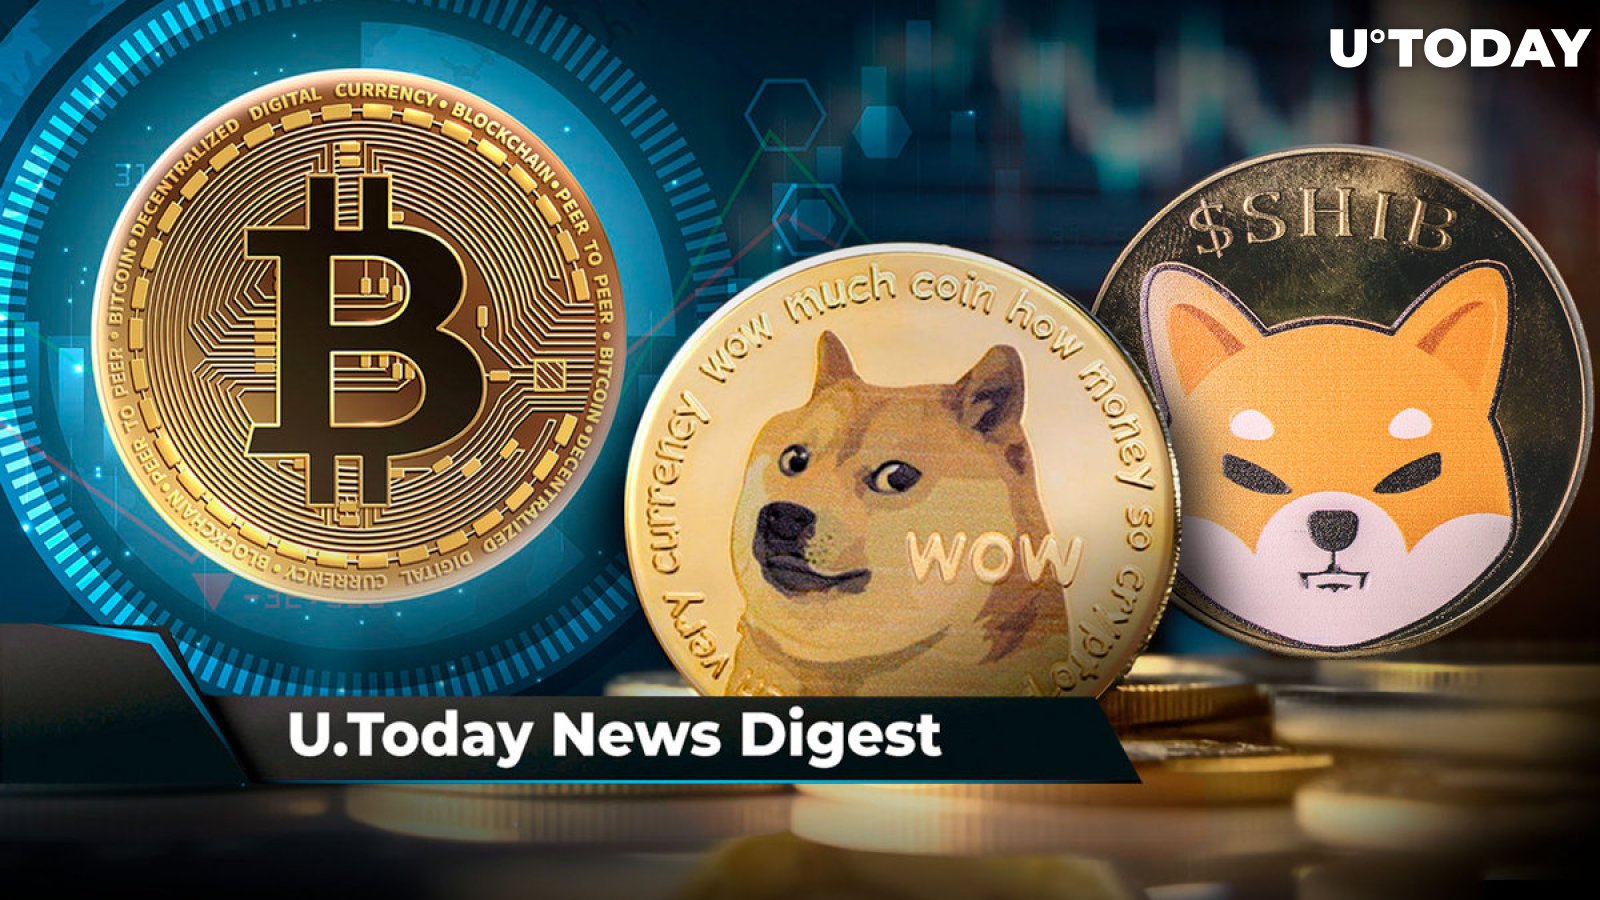 671,000 BTC Bought by Millions of Bitcoin Addresses in This Demand Zone, DOGE Rally Leaves 80% of Investors Profitable, 3 Billion SHIB Moved to Robinhood Address: U.Today's Crypto News Digest